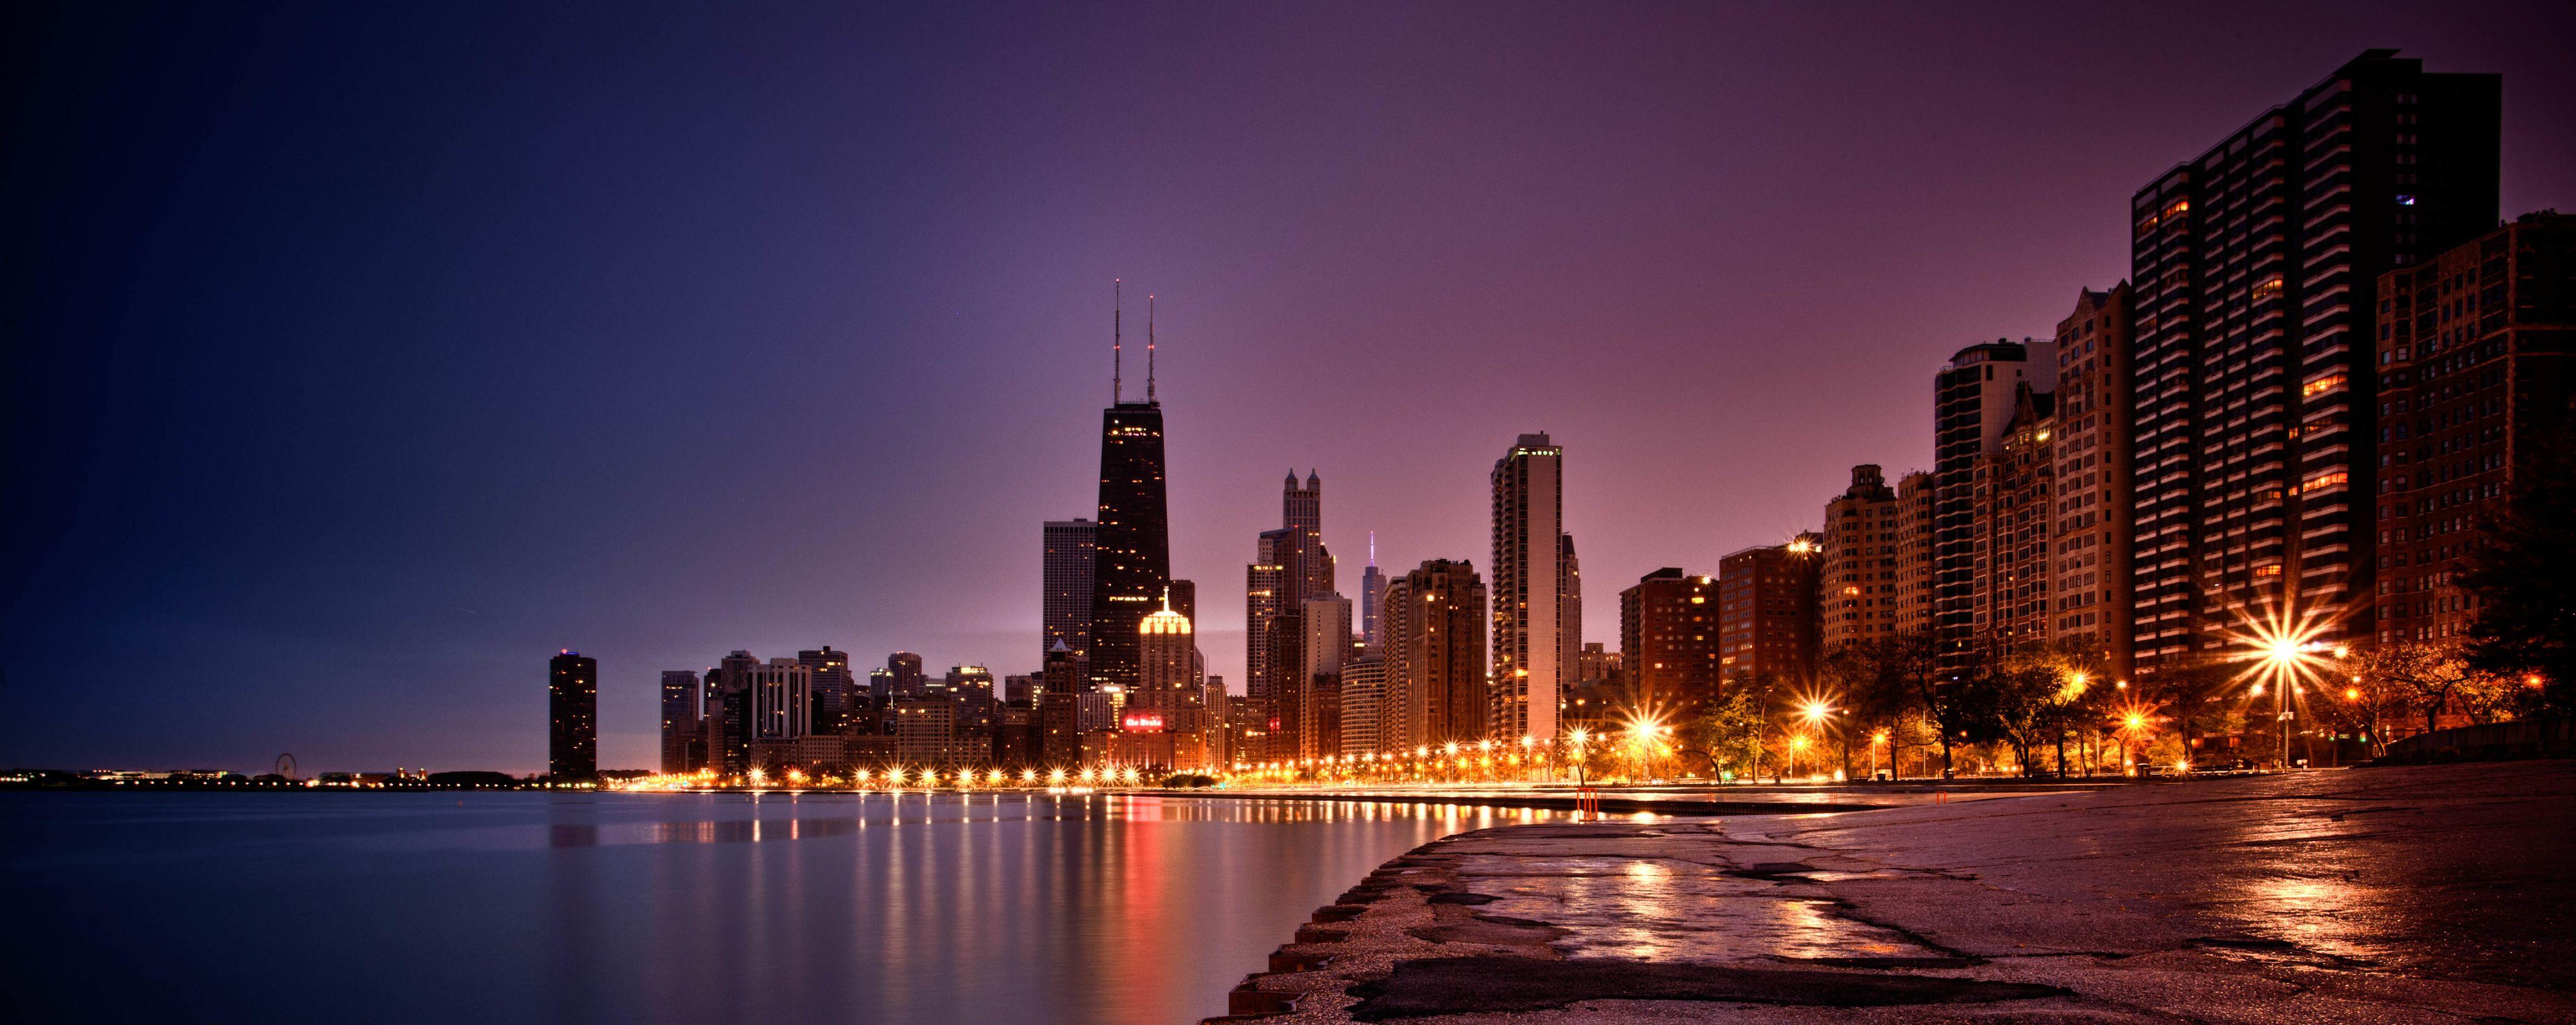 Wallpaper Night Chicago Skyscrapers USA Chicago skyline nightscape  images for desktop section город  download